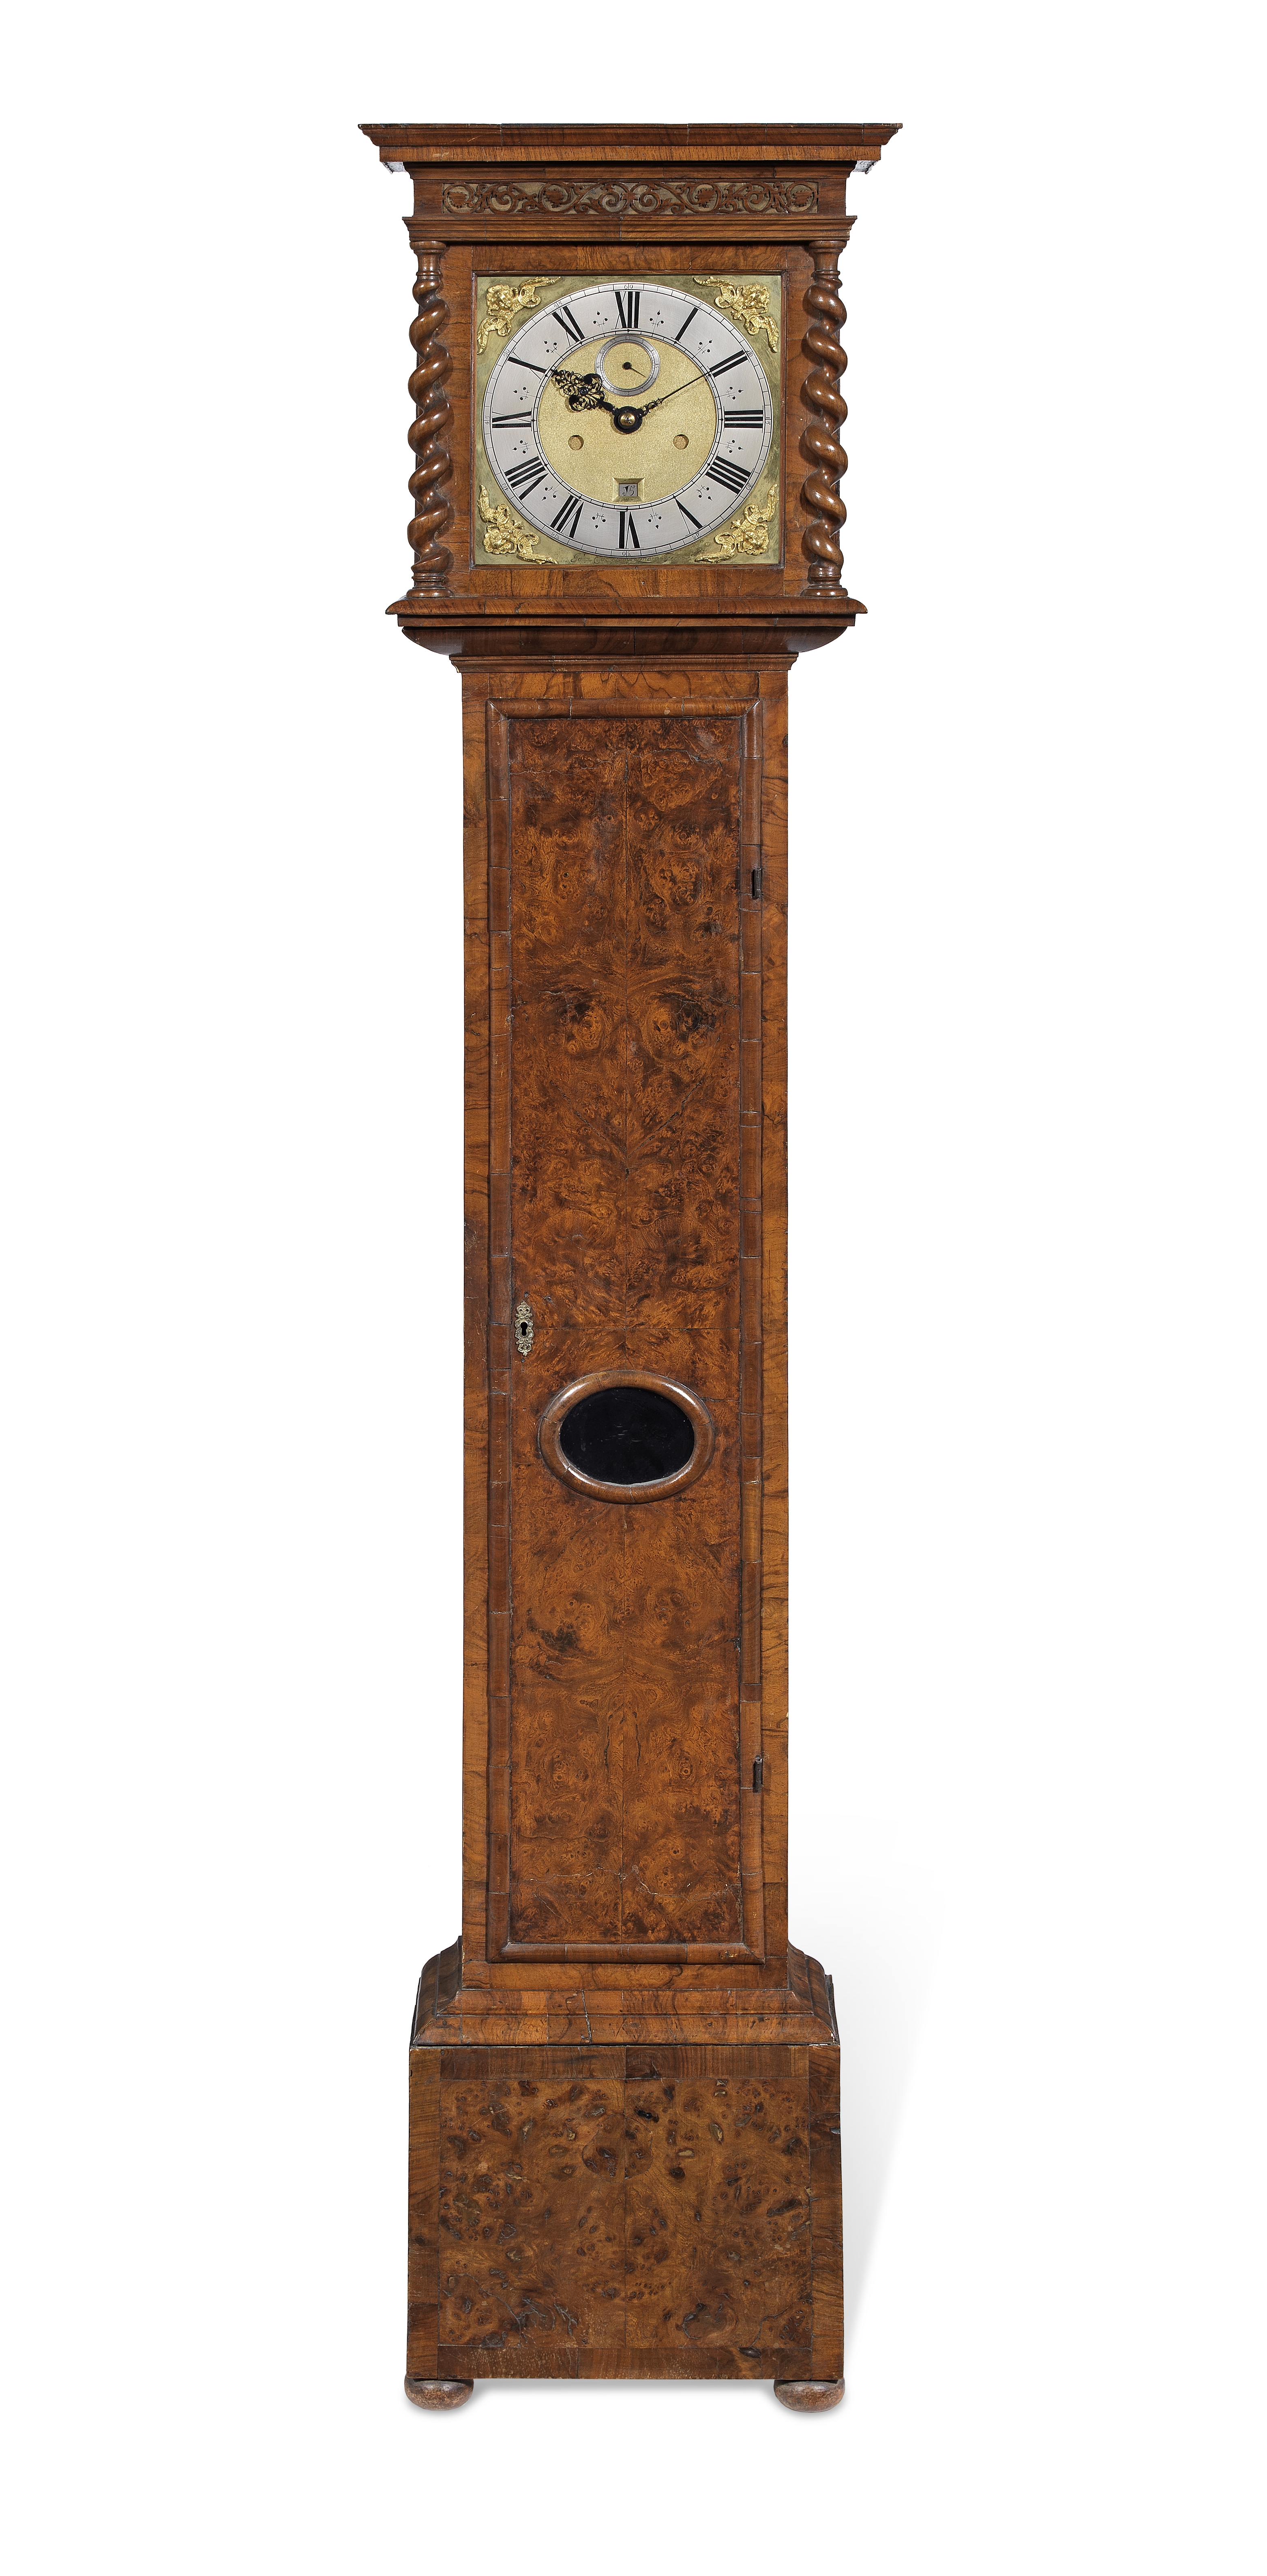 A LATE 17TH CENTURY BURR WALNUT VENEERED LONGCASE CLOCK WITH TEN-INCH DIAL AND BOLT-AND-SHUTTER M...